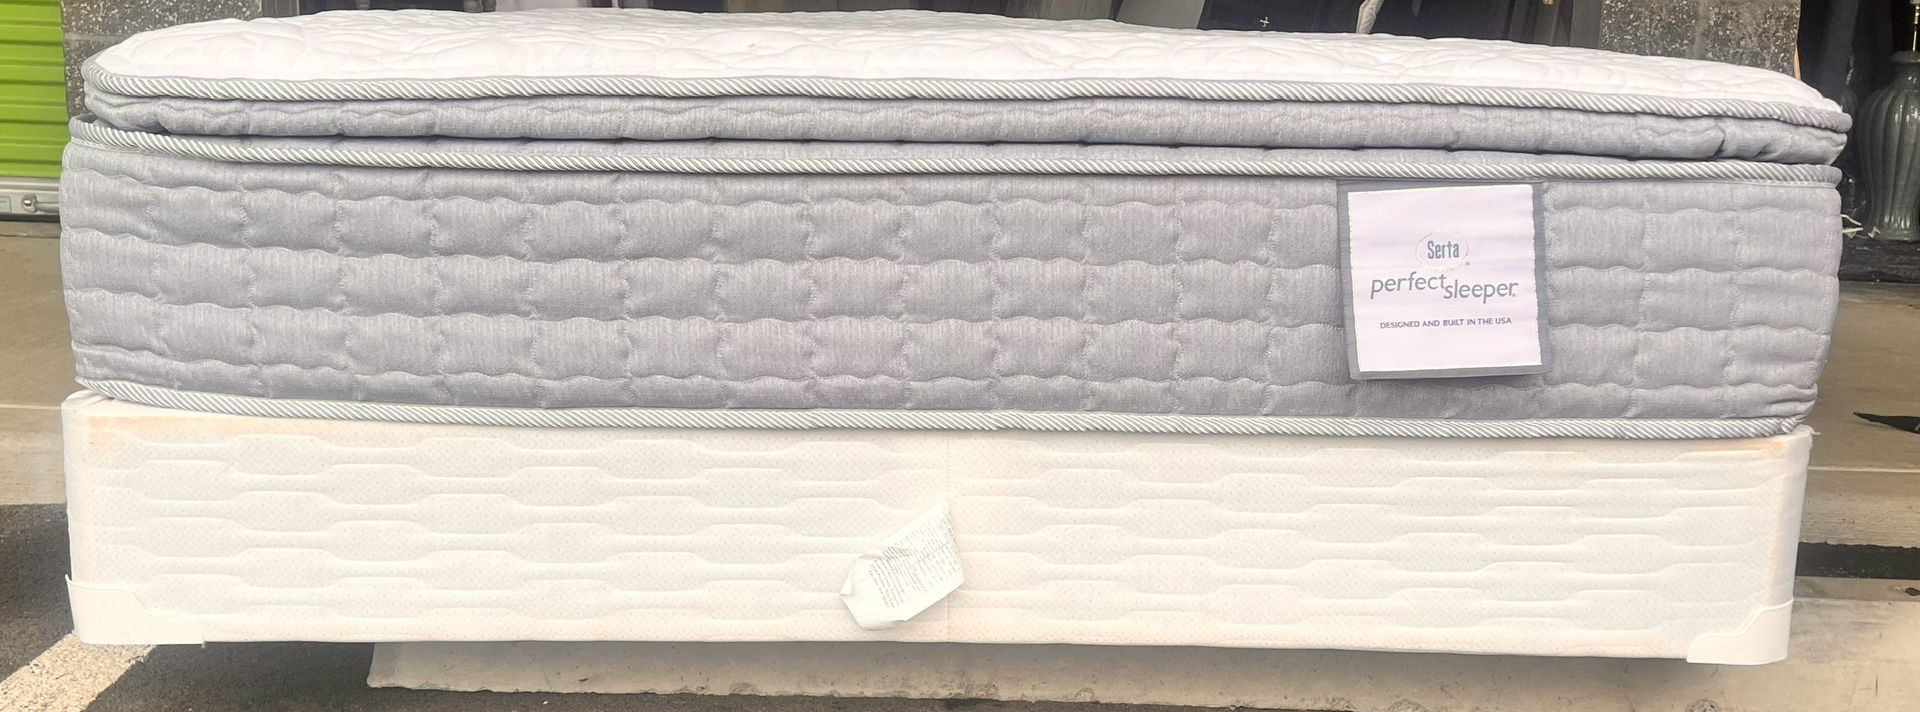 Queen Size Pillowtop Mattress - Box Spring And Frame Optional - OBO